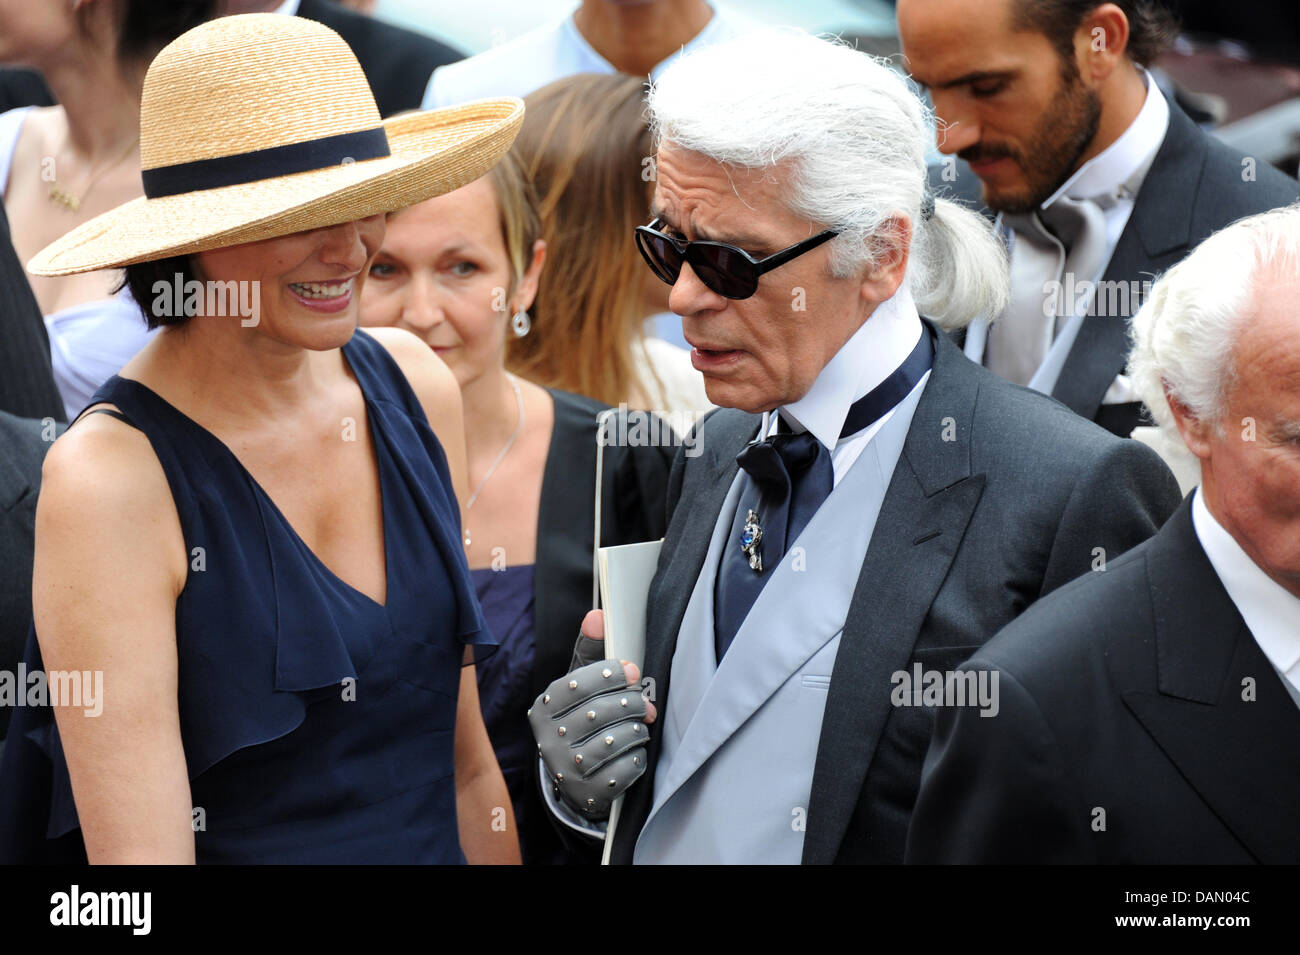 Fashion designer Karl Lagerfeld and model Ines de la Fressange arrive for  the religious wedding of Prince Albert II and Princess Charlene in the  Prince's Palace in Monaco, 02 July 2011. Some